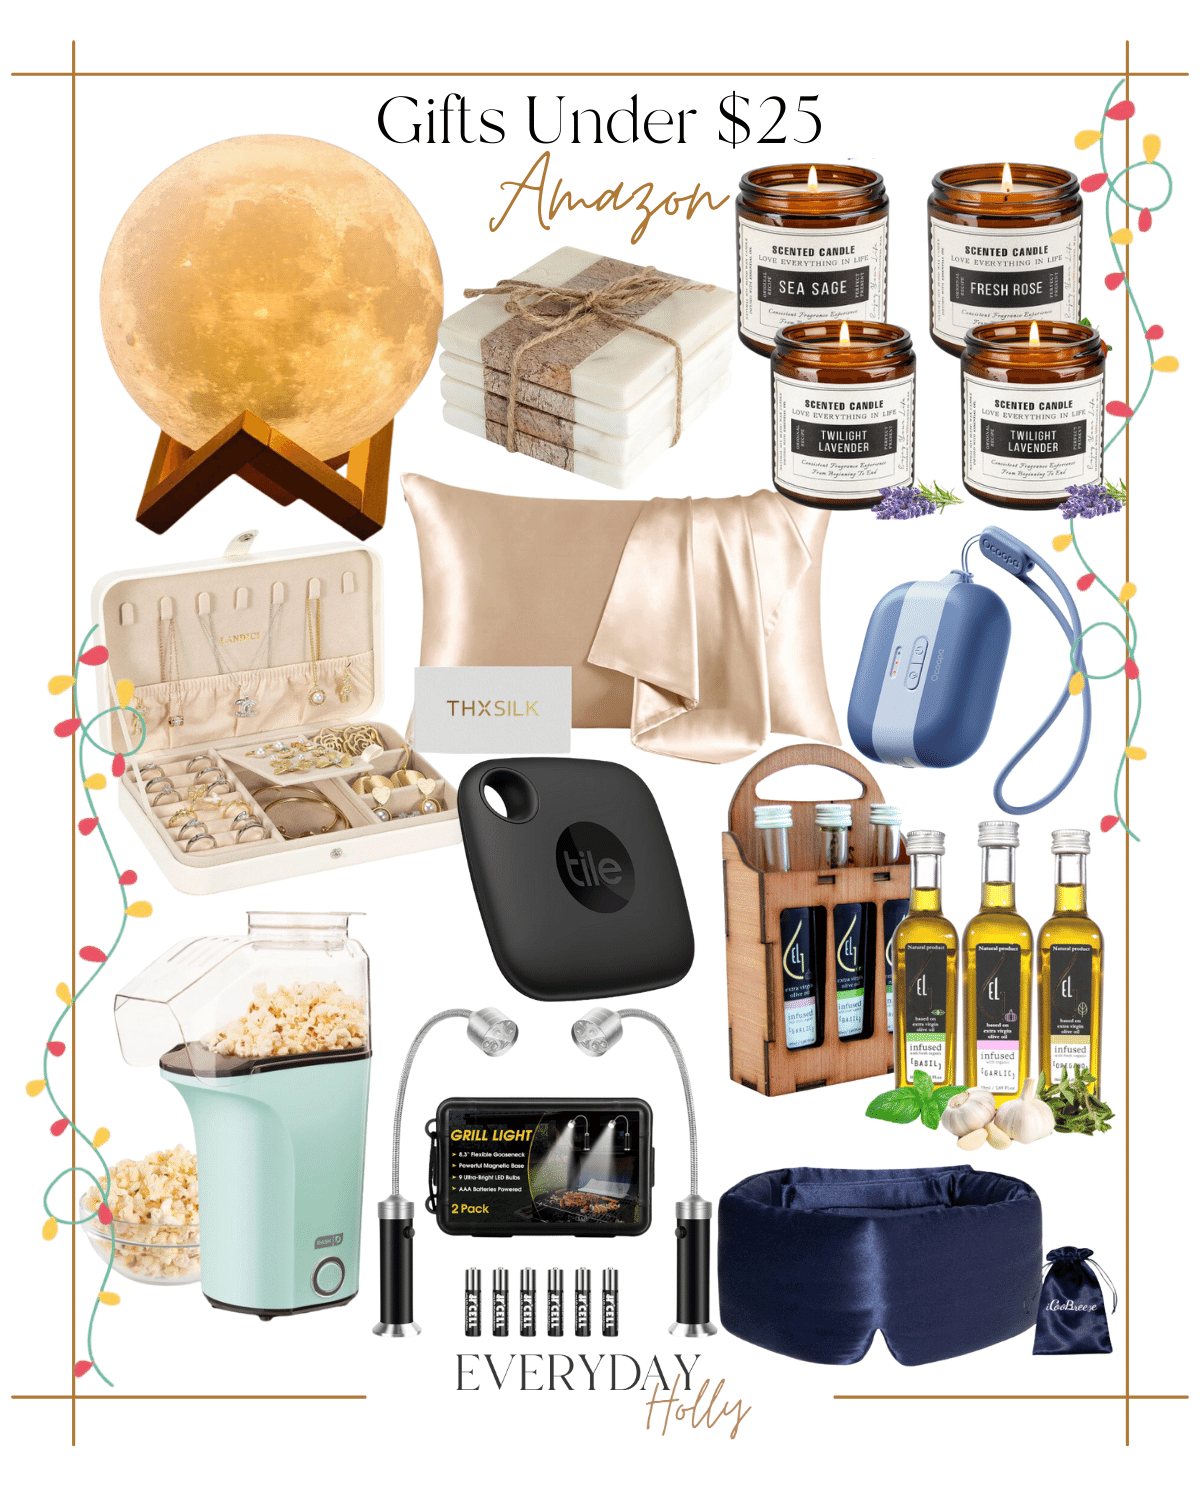 99 last minute gifts under $99 | #last #minute #gifts #giftideas #giftsunder99 #under99 #giftsunder25 #under25 #moonlamp #candle #handwarmer #silk #pillowcase #mask #oliveoil #jewelry #popcorn #tile #grilllight #coaster